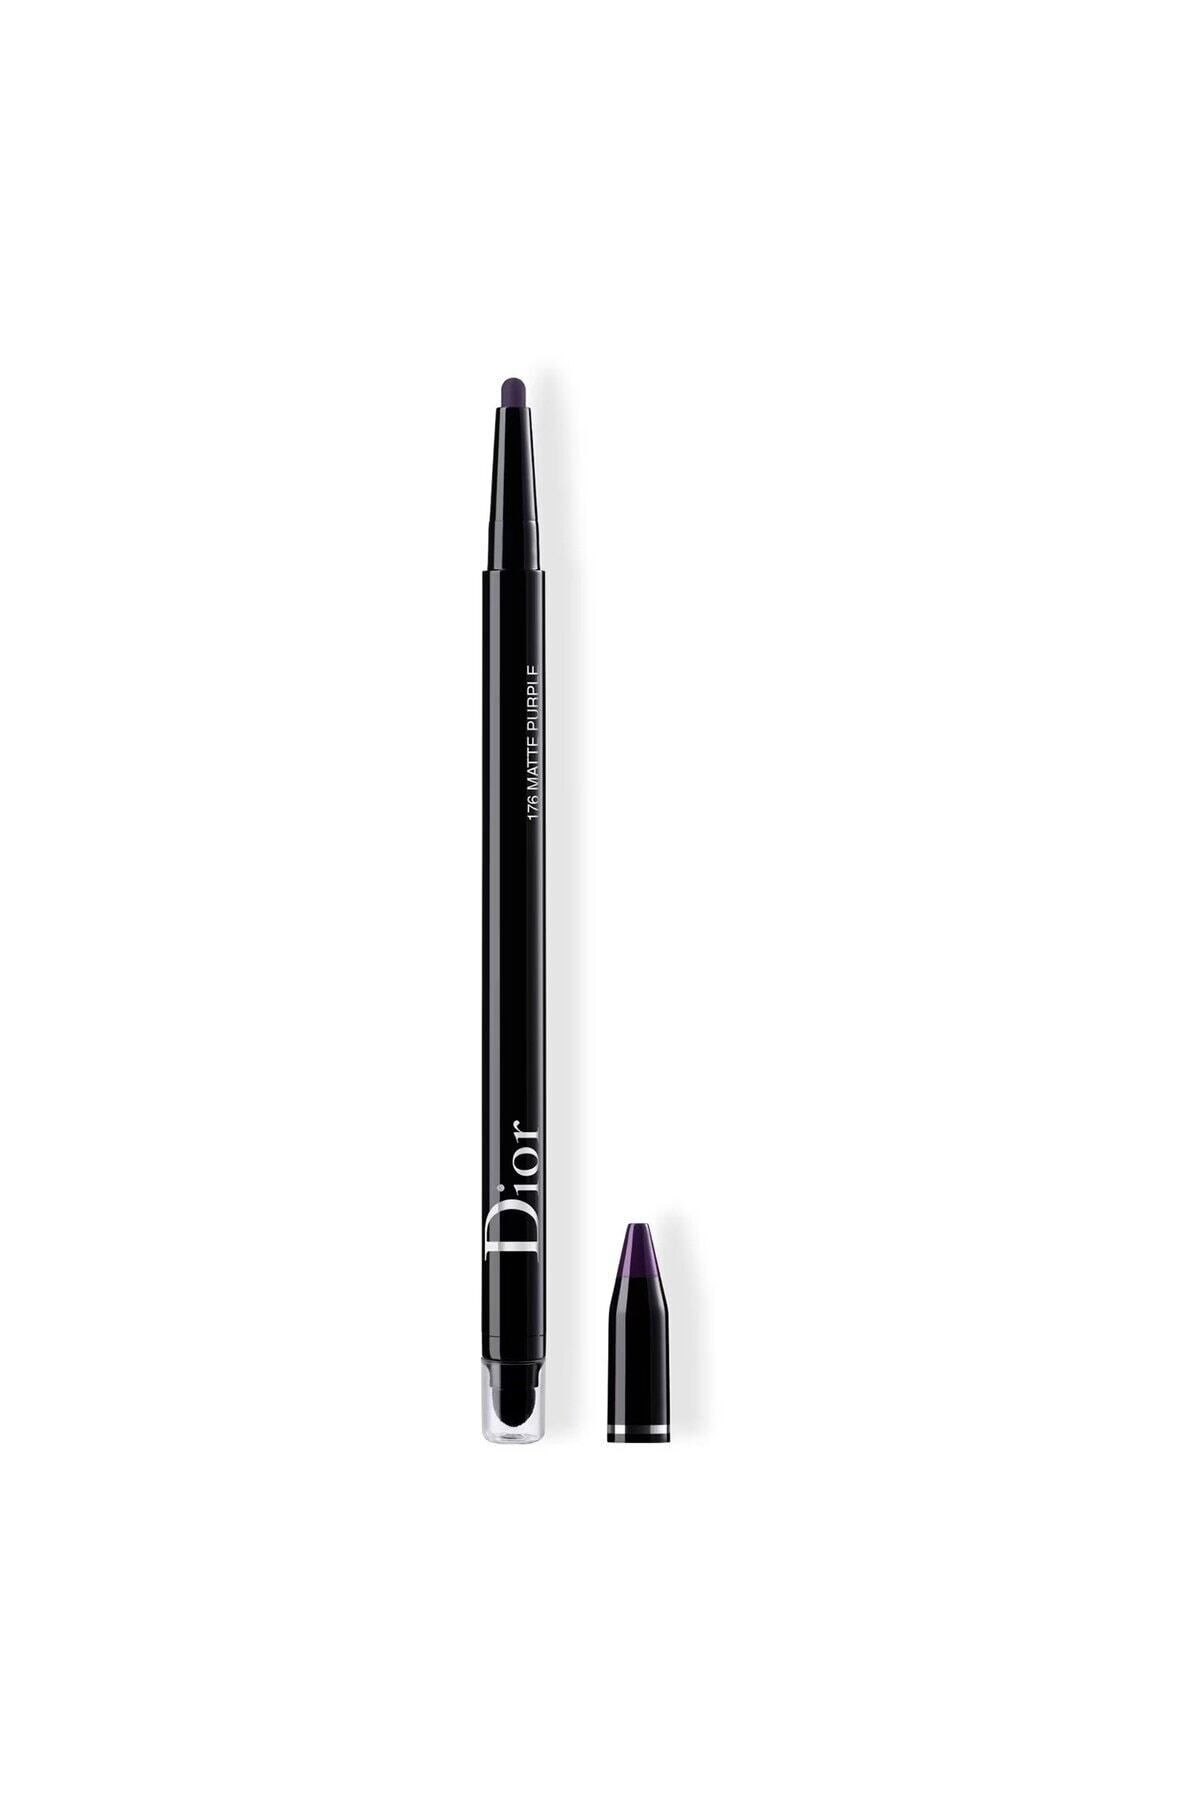 Dior 24H* STYLO WATERPROOF - 24 HOUR LASTİNG AND HİGH INTENSİTY APPEARANCE EYELİNER PSSN1959